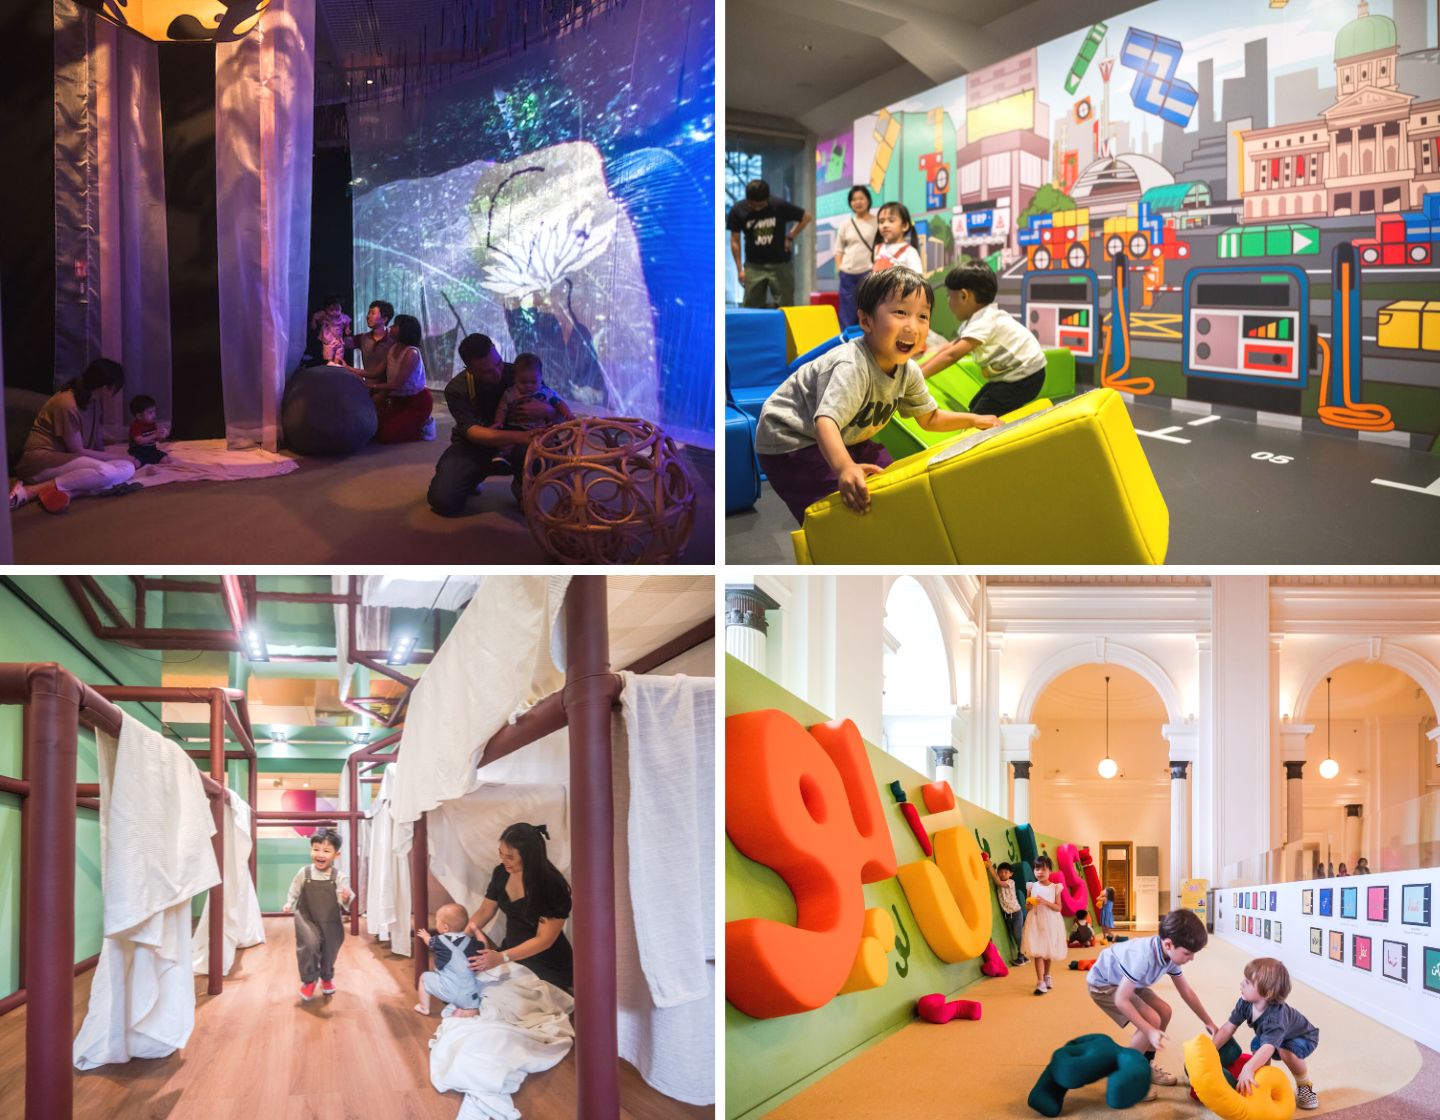 Last Chance to Visit Gallery Children’s Biennale at National Gallery Singapore!